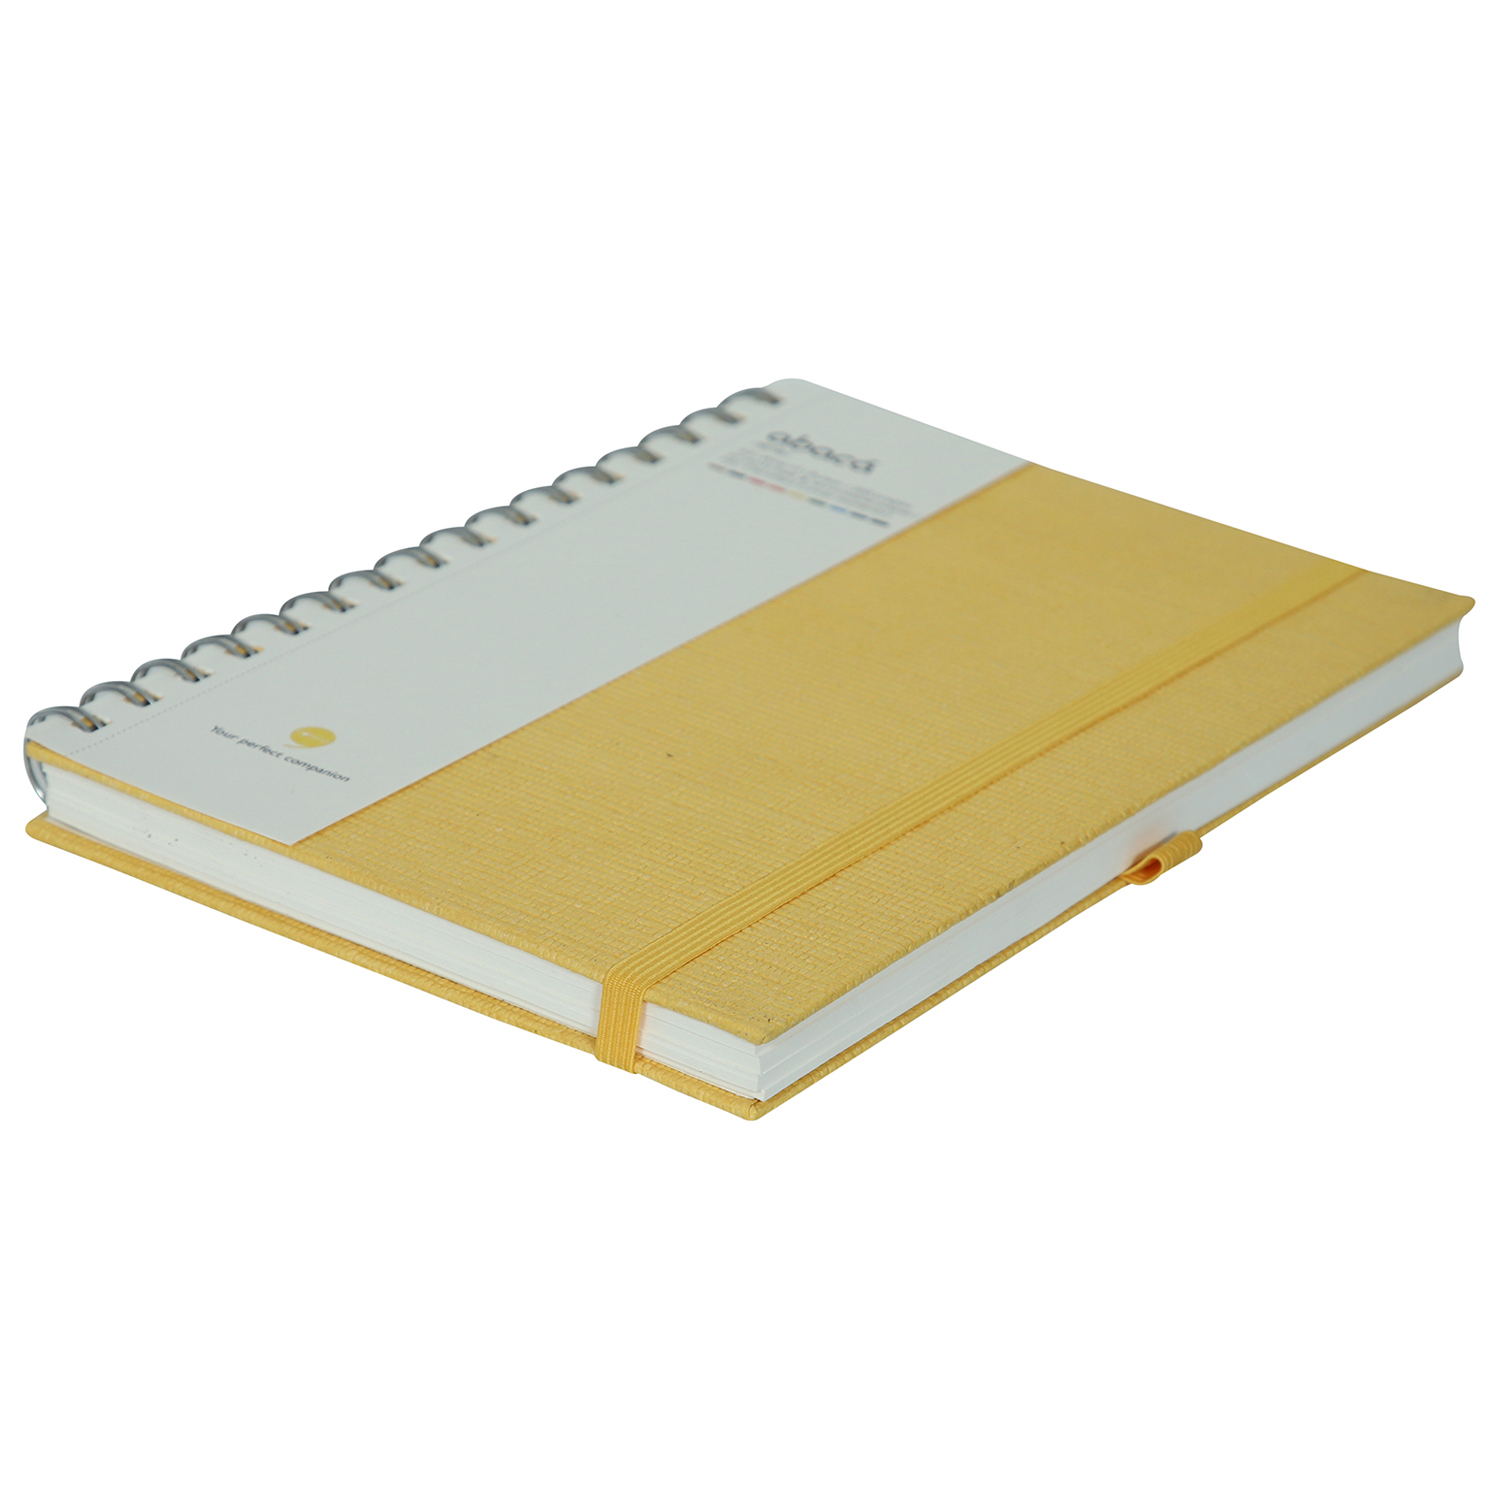 Comma Abaca - A5 Size - Wire-o-bound Notebook (Yellow)